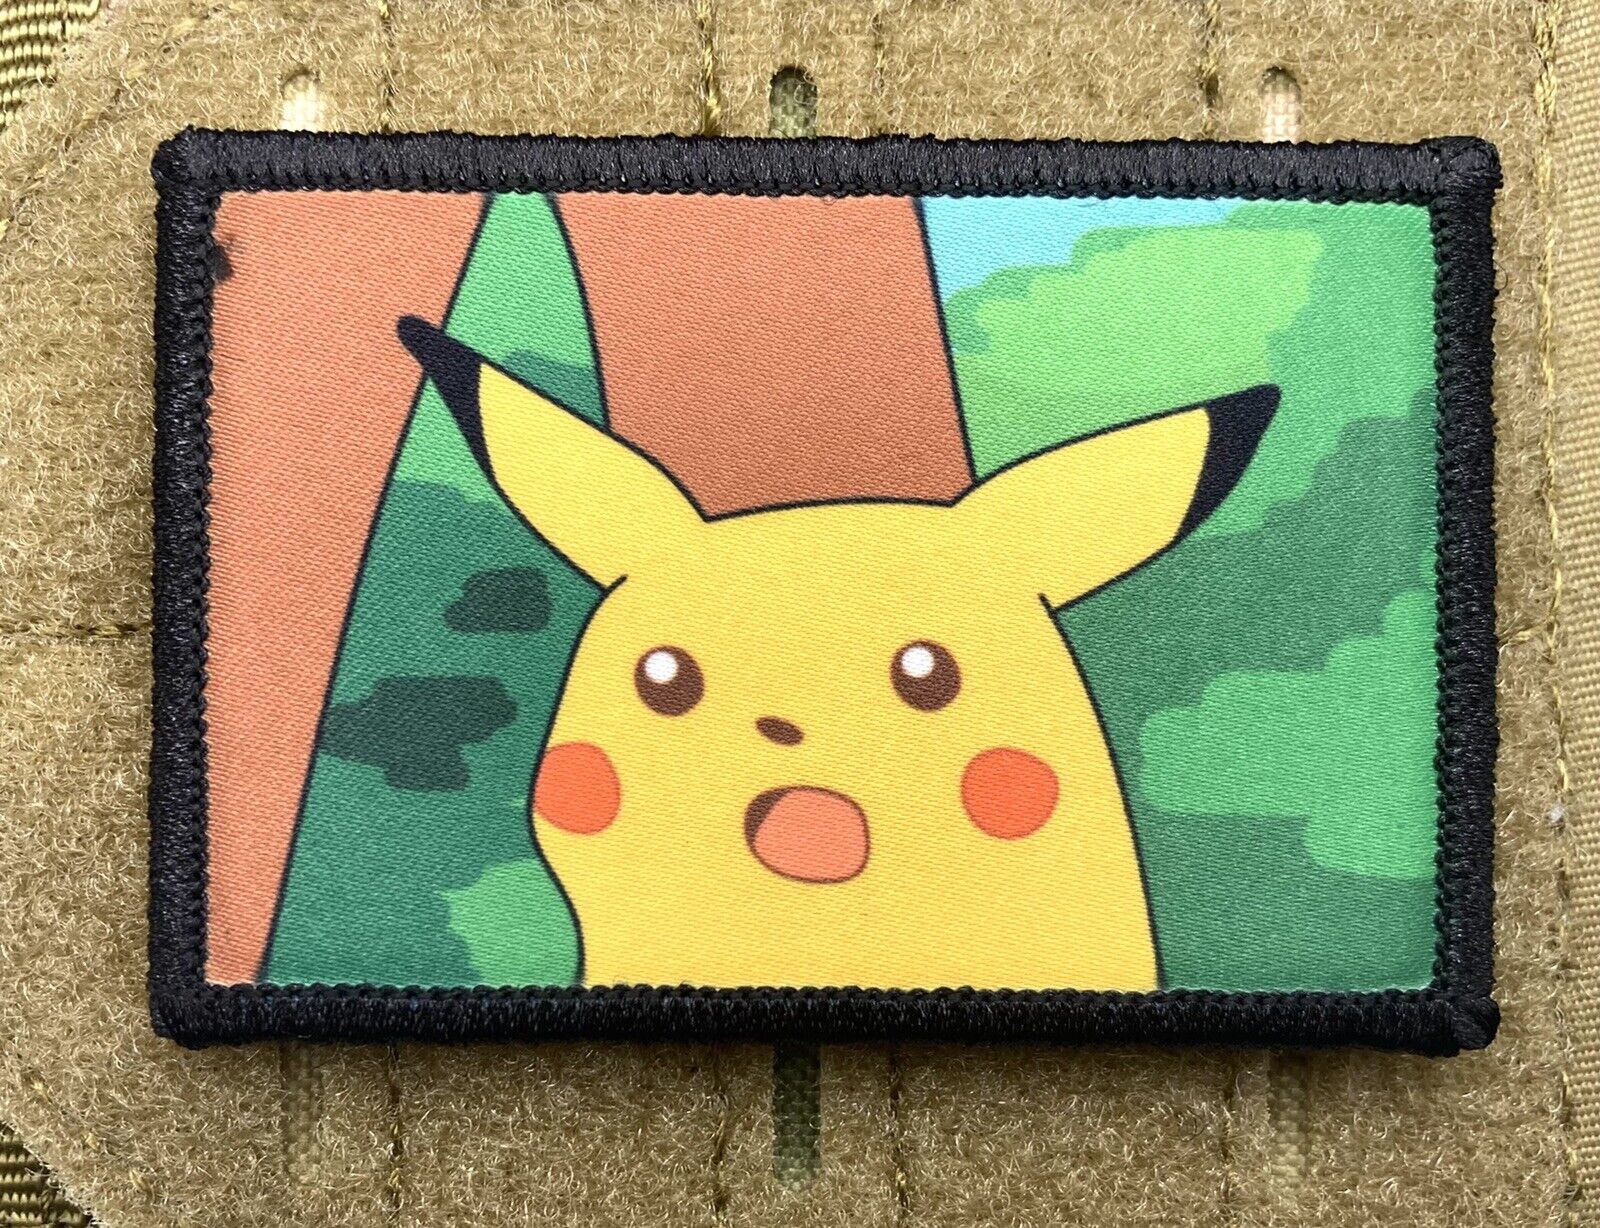 Surprised Pikachu Pokemon Meme Morale Patch / Military Badge ARMY Tactical 67